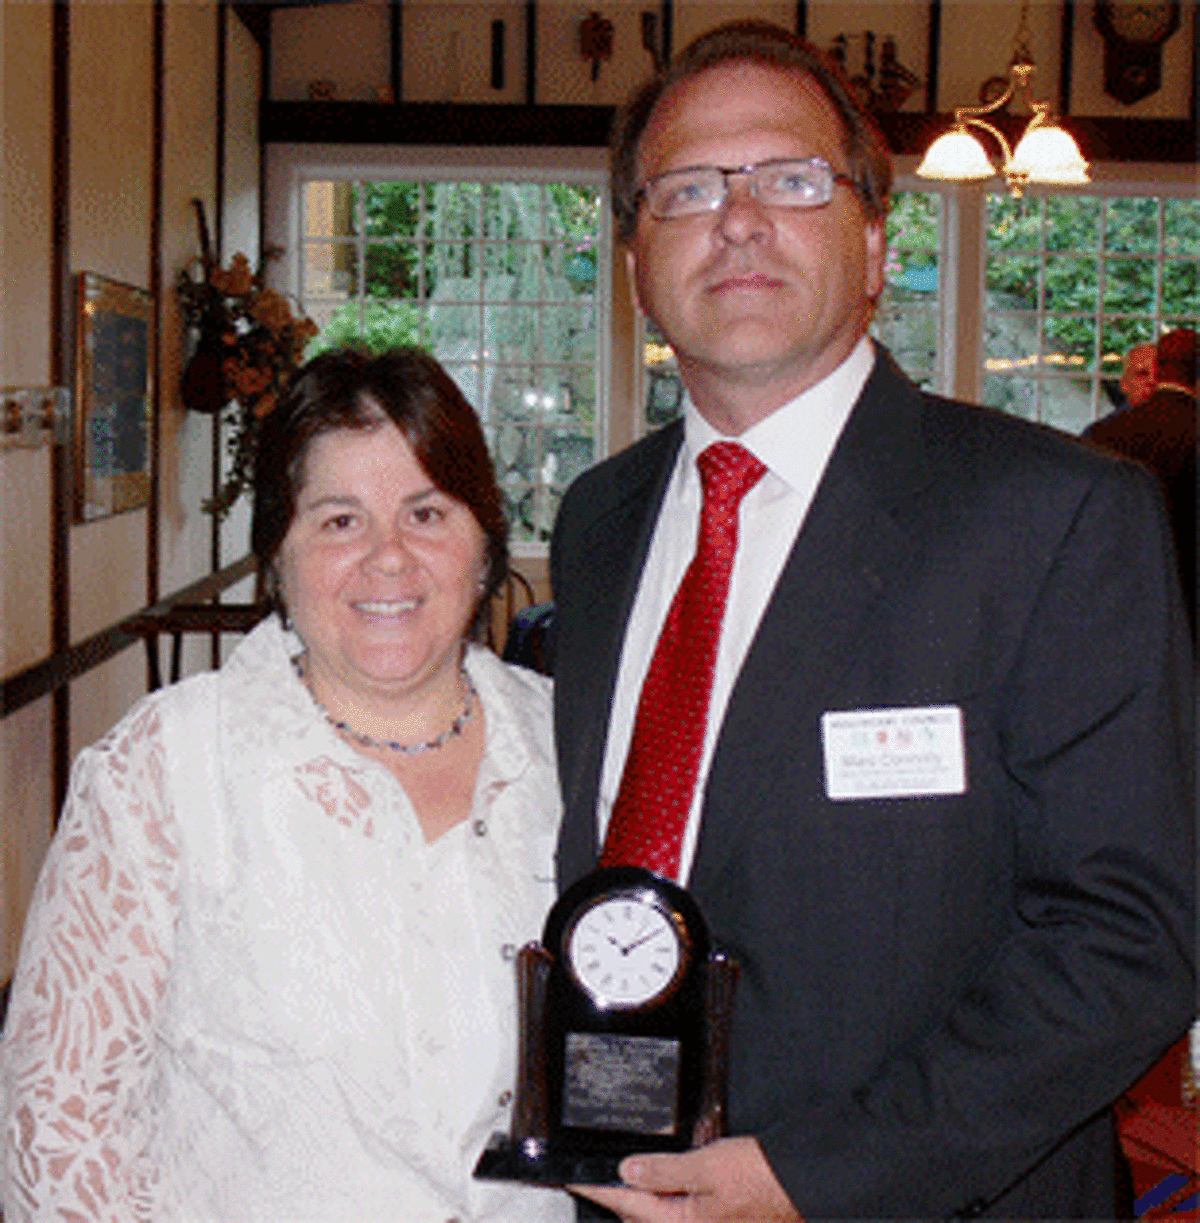 Susan Goodman, the widow of James Goodman, with Marc Connolly holding his award at the Greater Valley Chamber of Commerce event. The award is named after James Goodman.